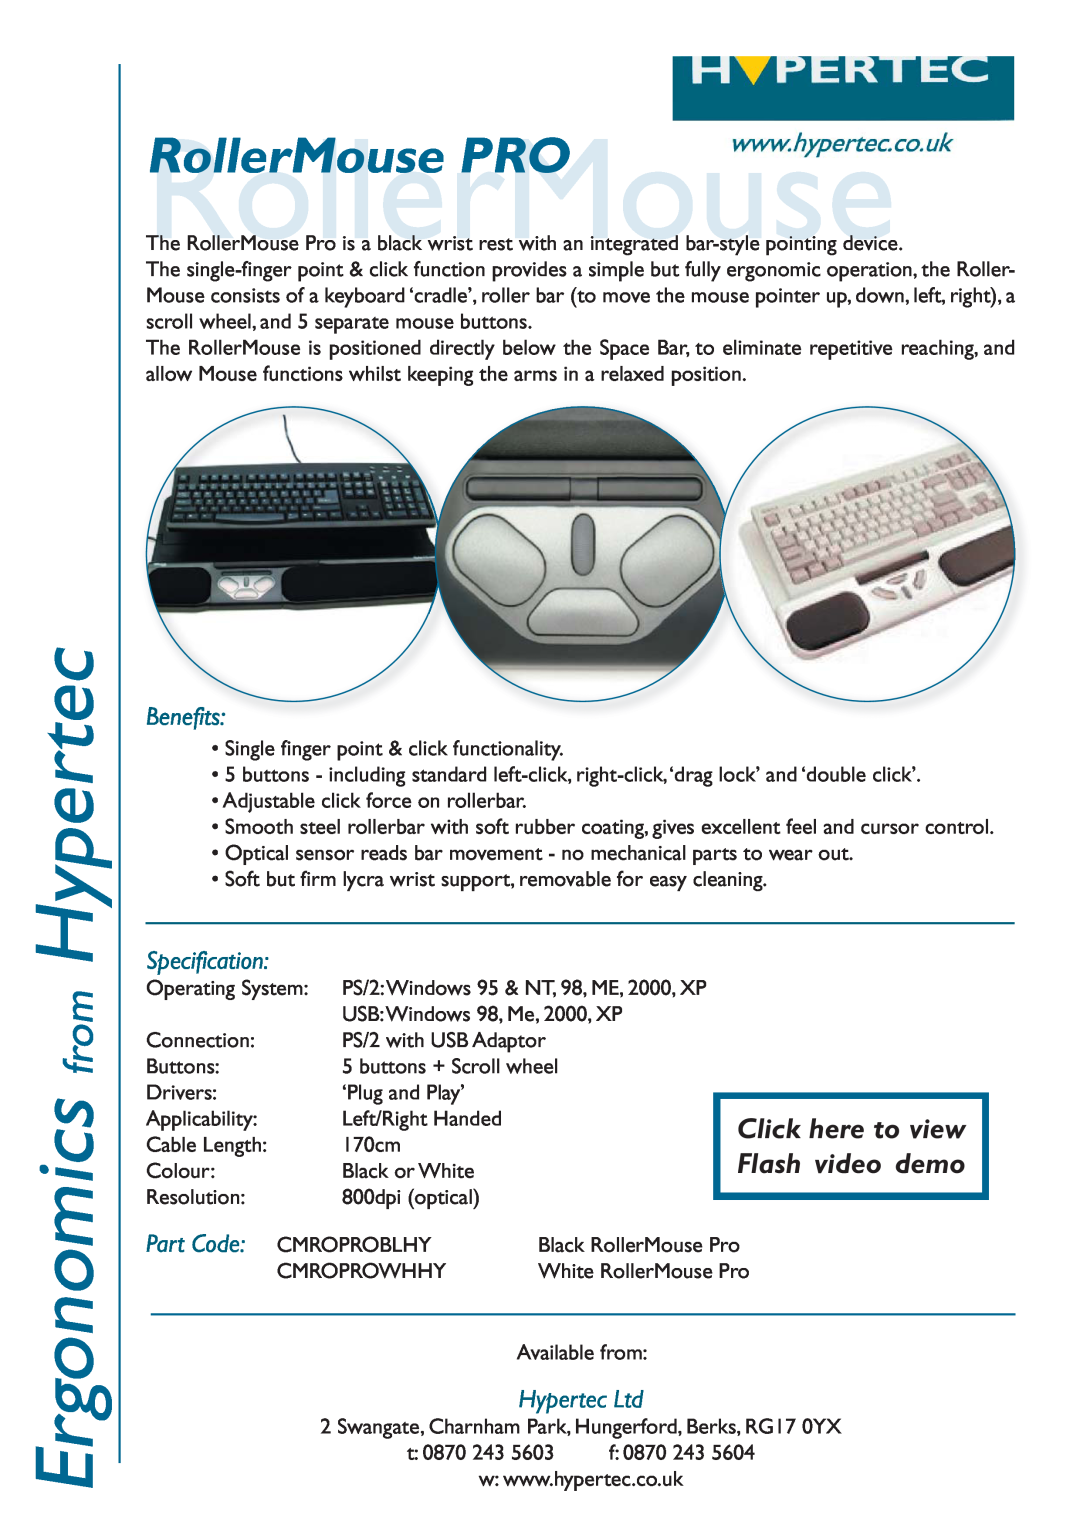 Hypertec CMROPROWHHY manual Hypertec, Ergonomics, RollerMouse PRO, from, Click here to view Flash video demo, Benefits 